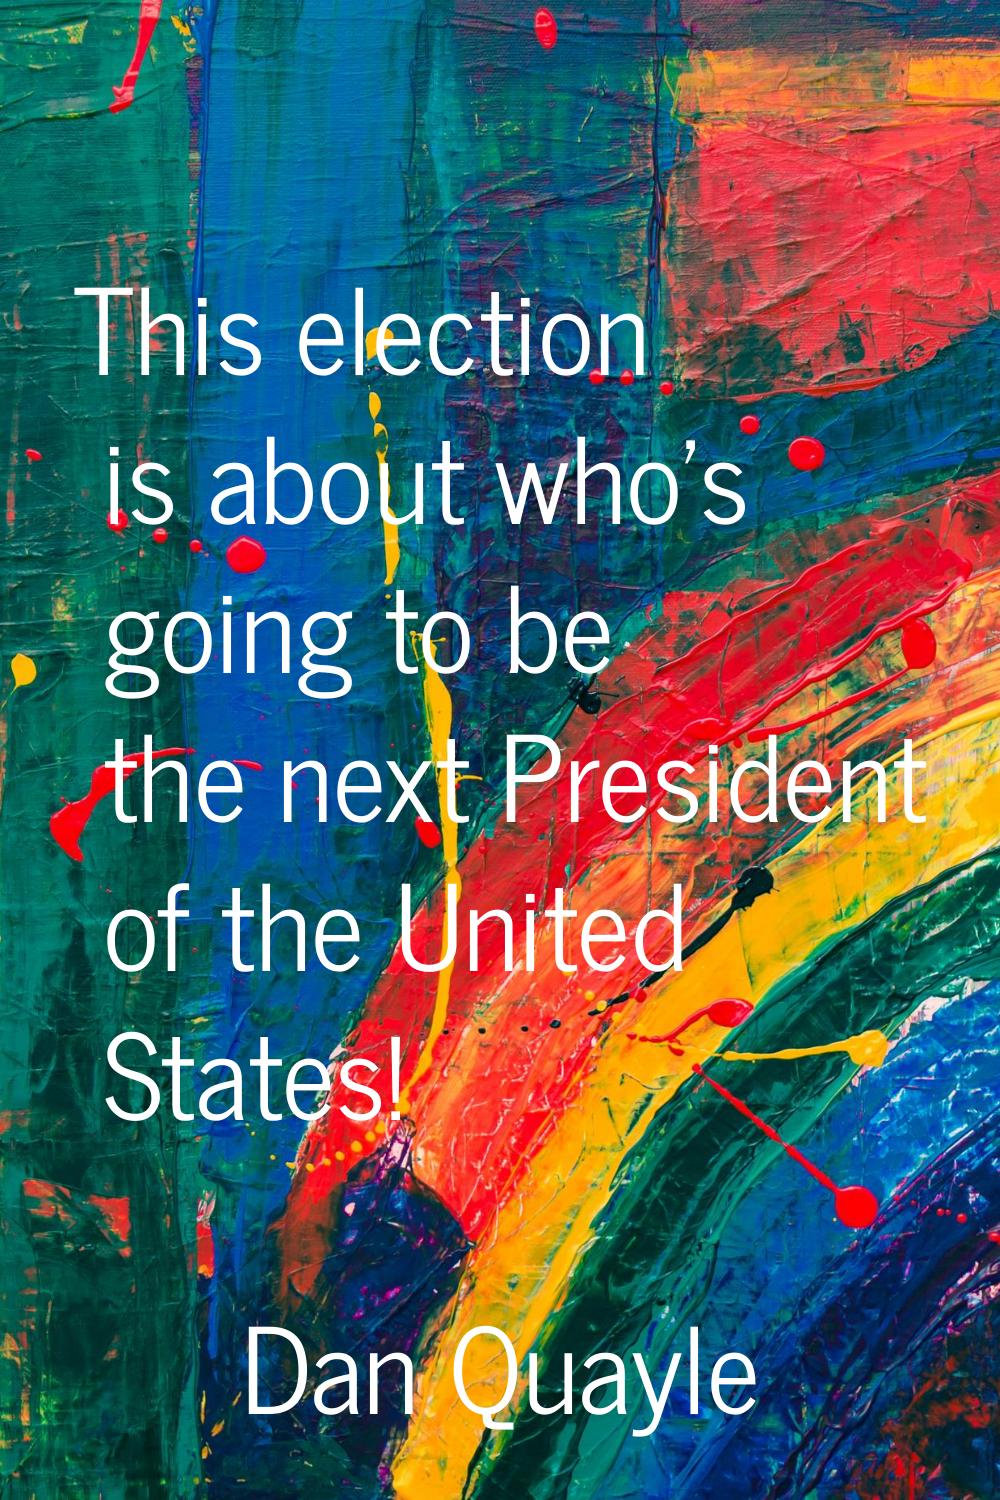 This election is about who's going to be the next President of the United States!